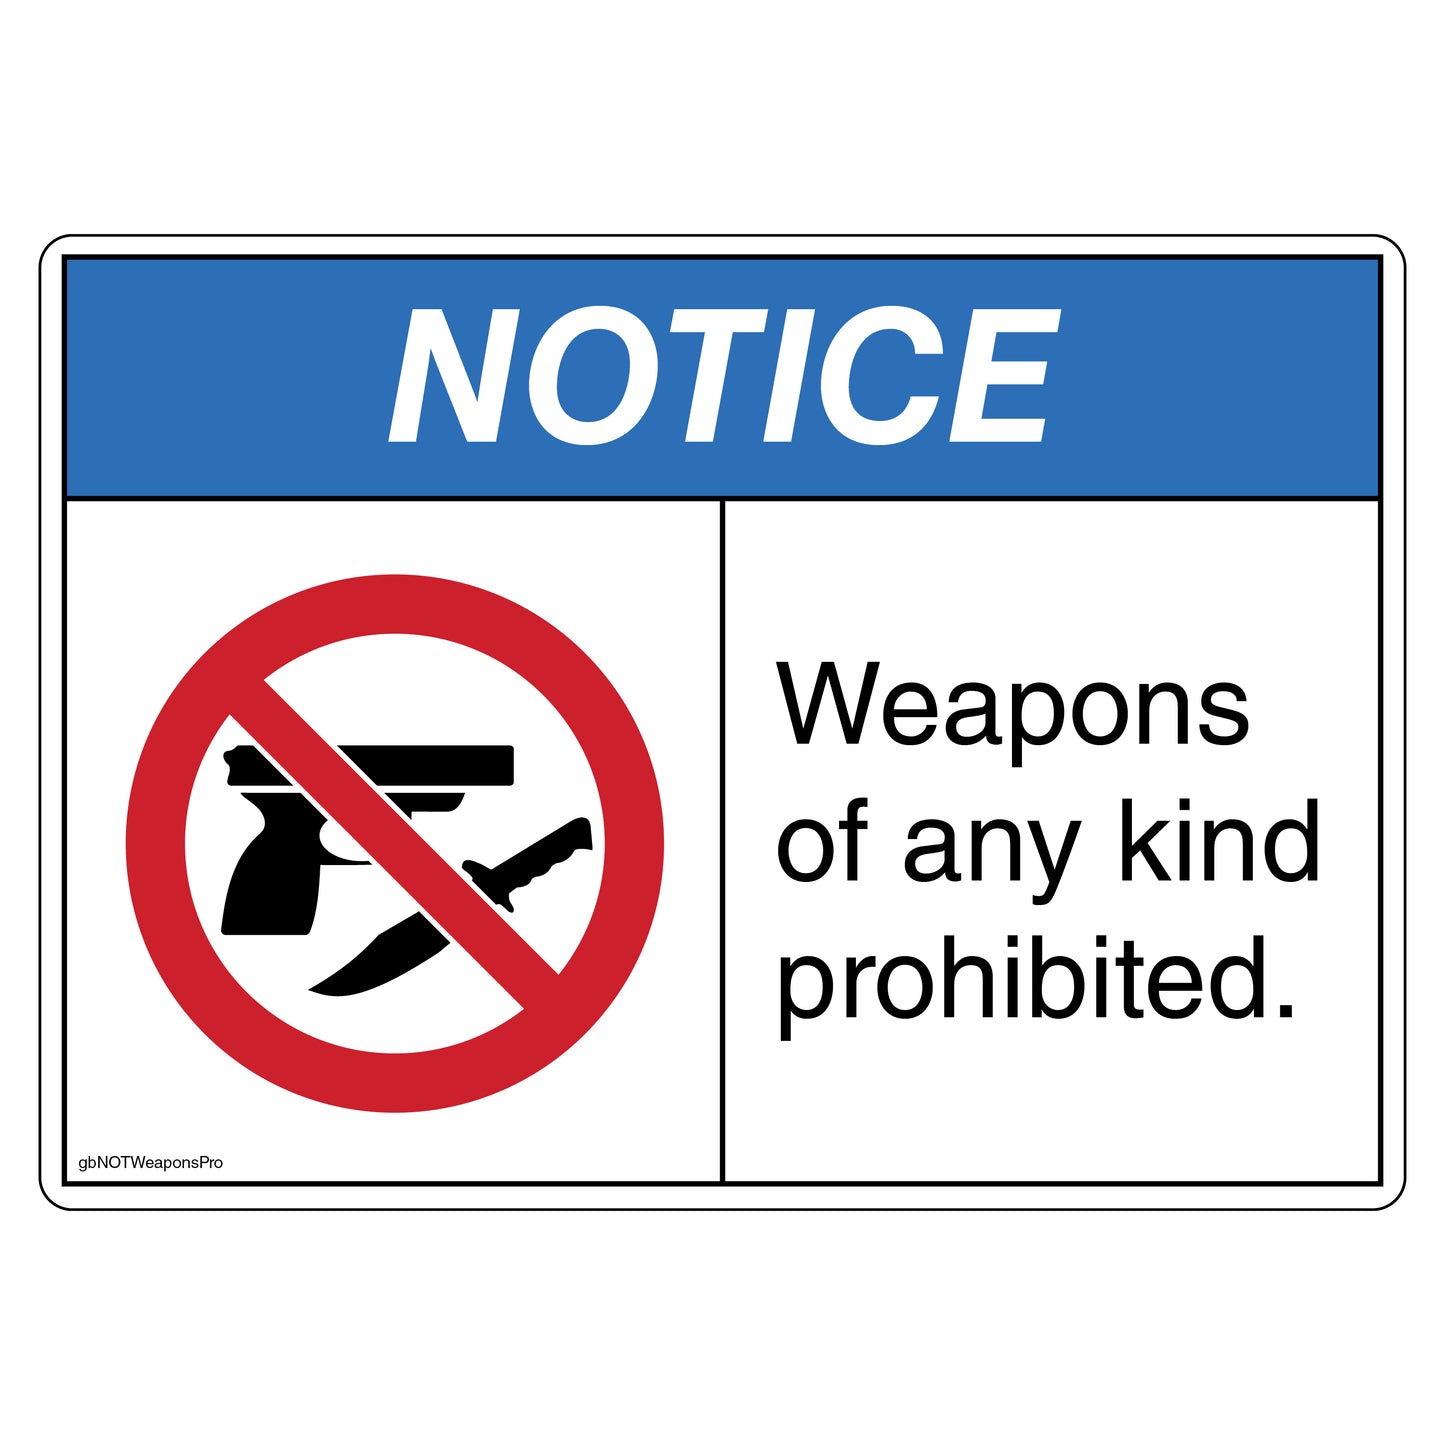 Notice Weapons of Any Kind Prohibited Decal.